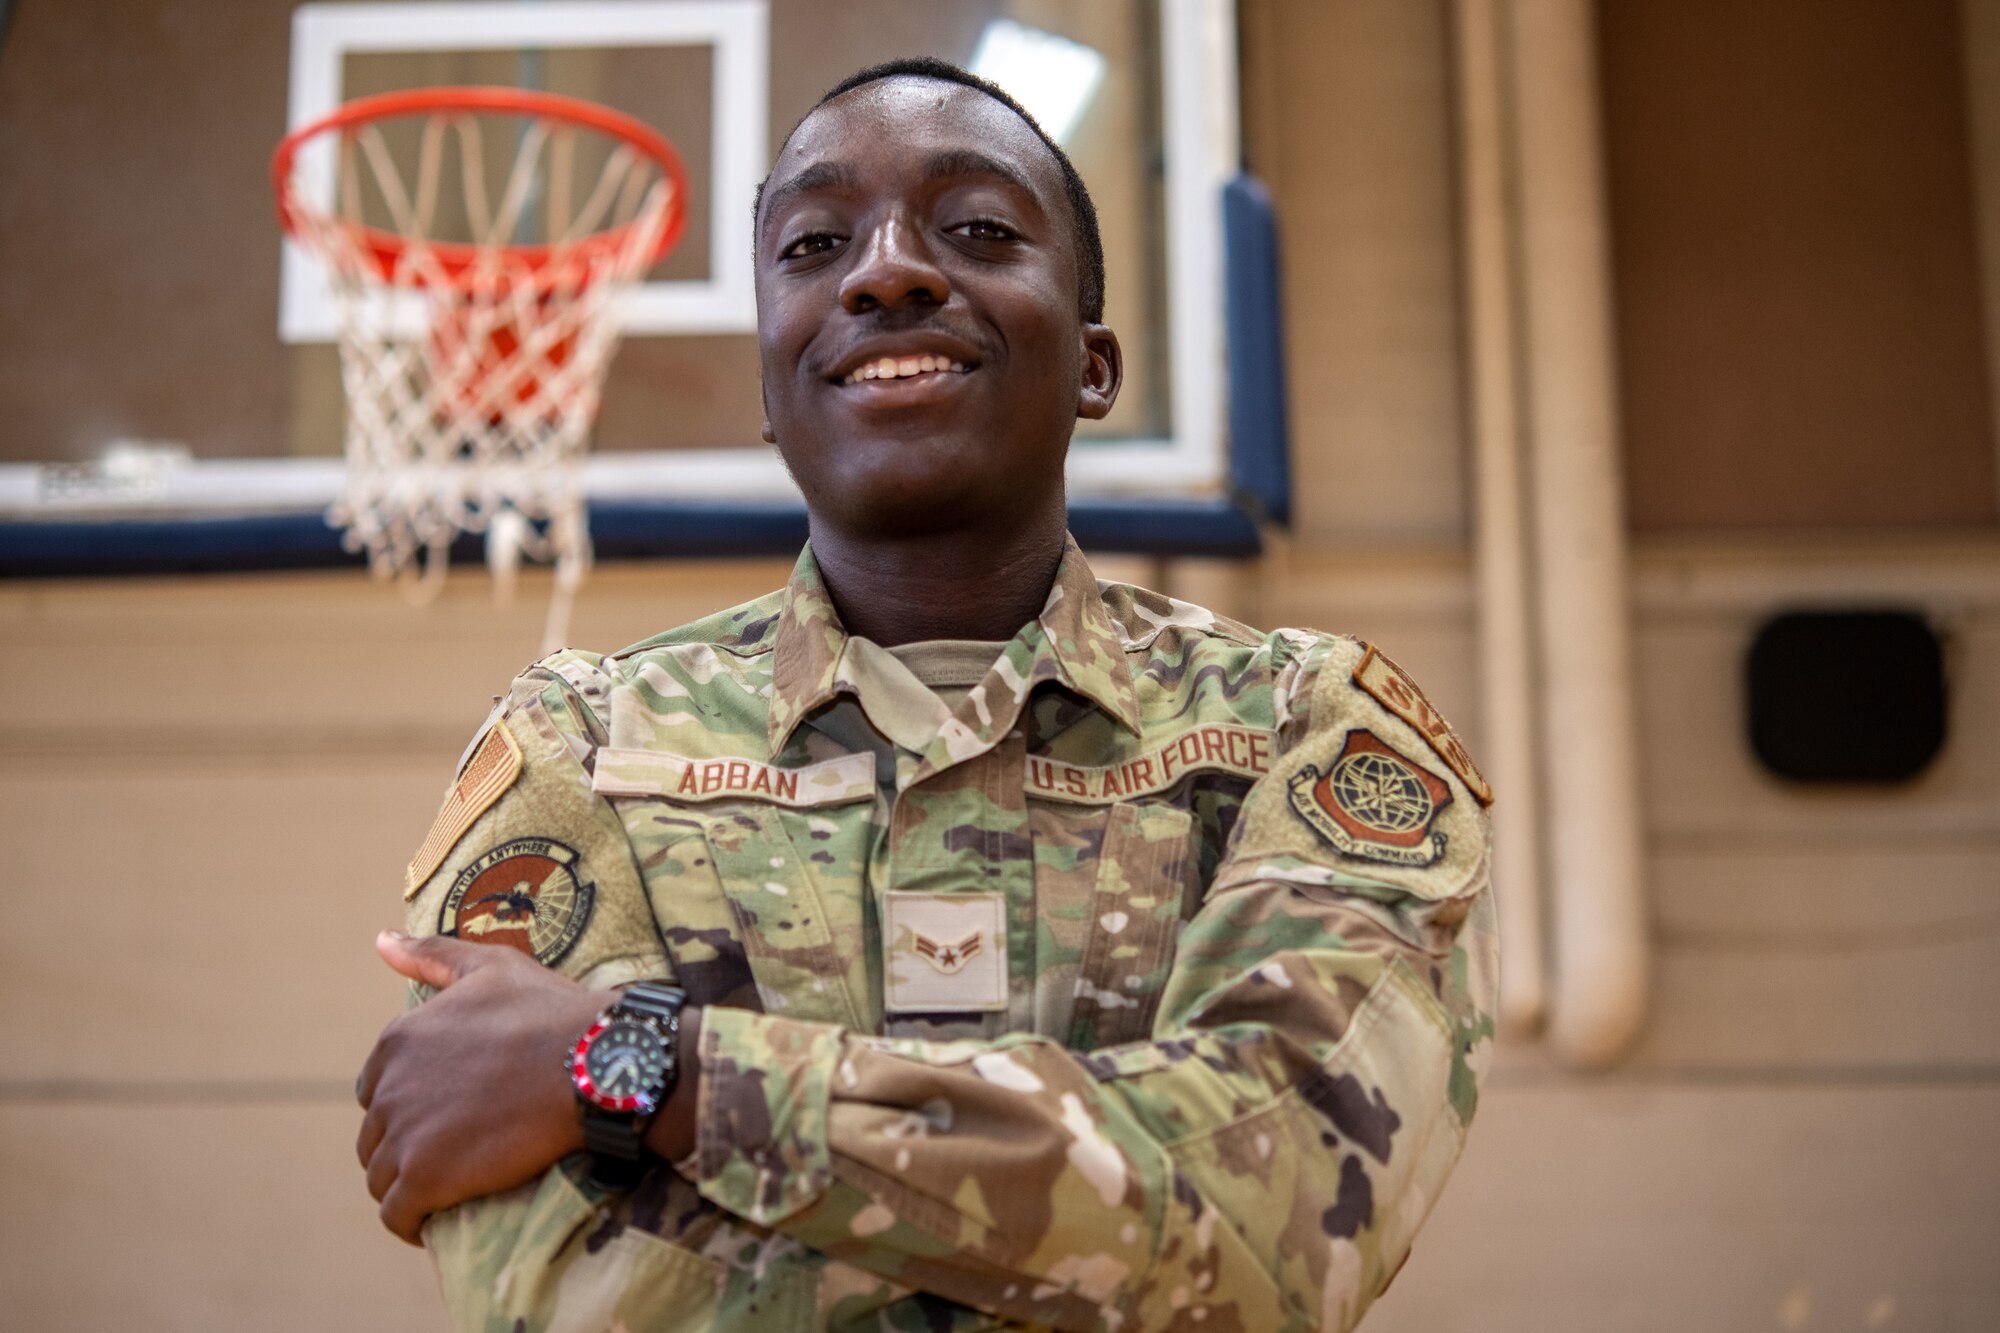 Airman 1st Class Christof Abban, 628th Force Support Squadron services specialist, poses for a photo on the basketball court at the Air Base Fitness and Sports Center on Joint Base Charleston, South Carolina, August 19, 2022. The squadron deploys worldwide to support military operations and provides support to more than 80,000 active duty personnel and their families, as well as retirees, DoD civilians, and reservists. (U.S. Air Force photo by Airman 1st Class Christian Silvera)